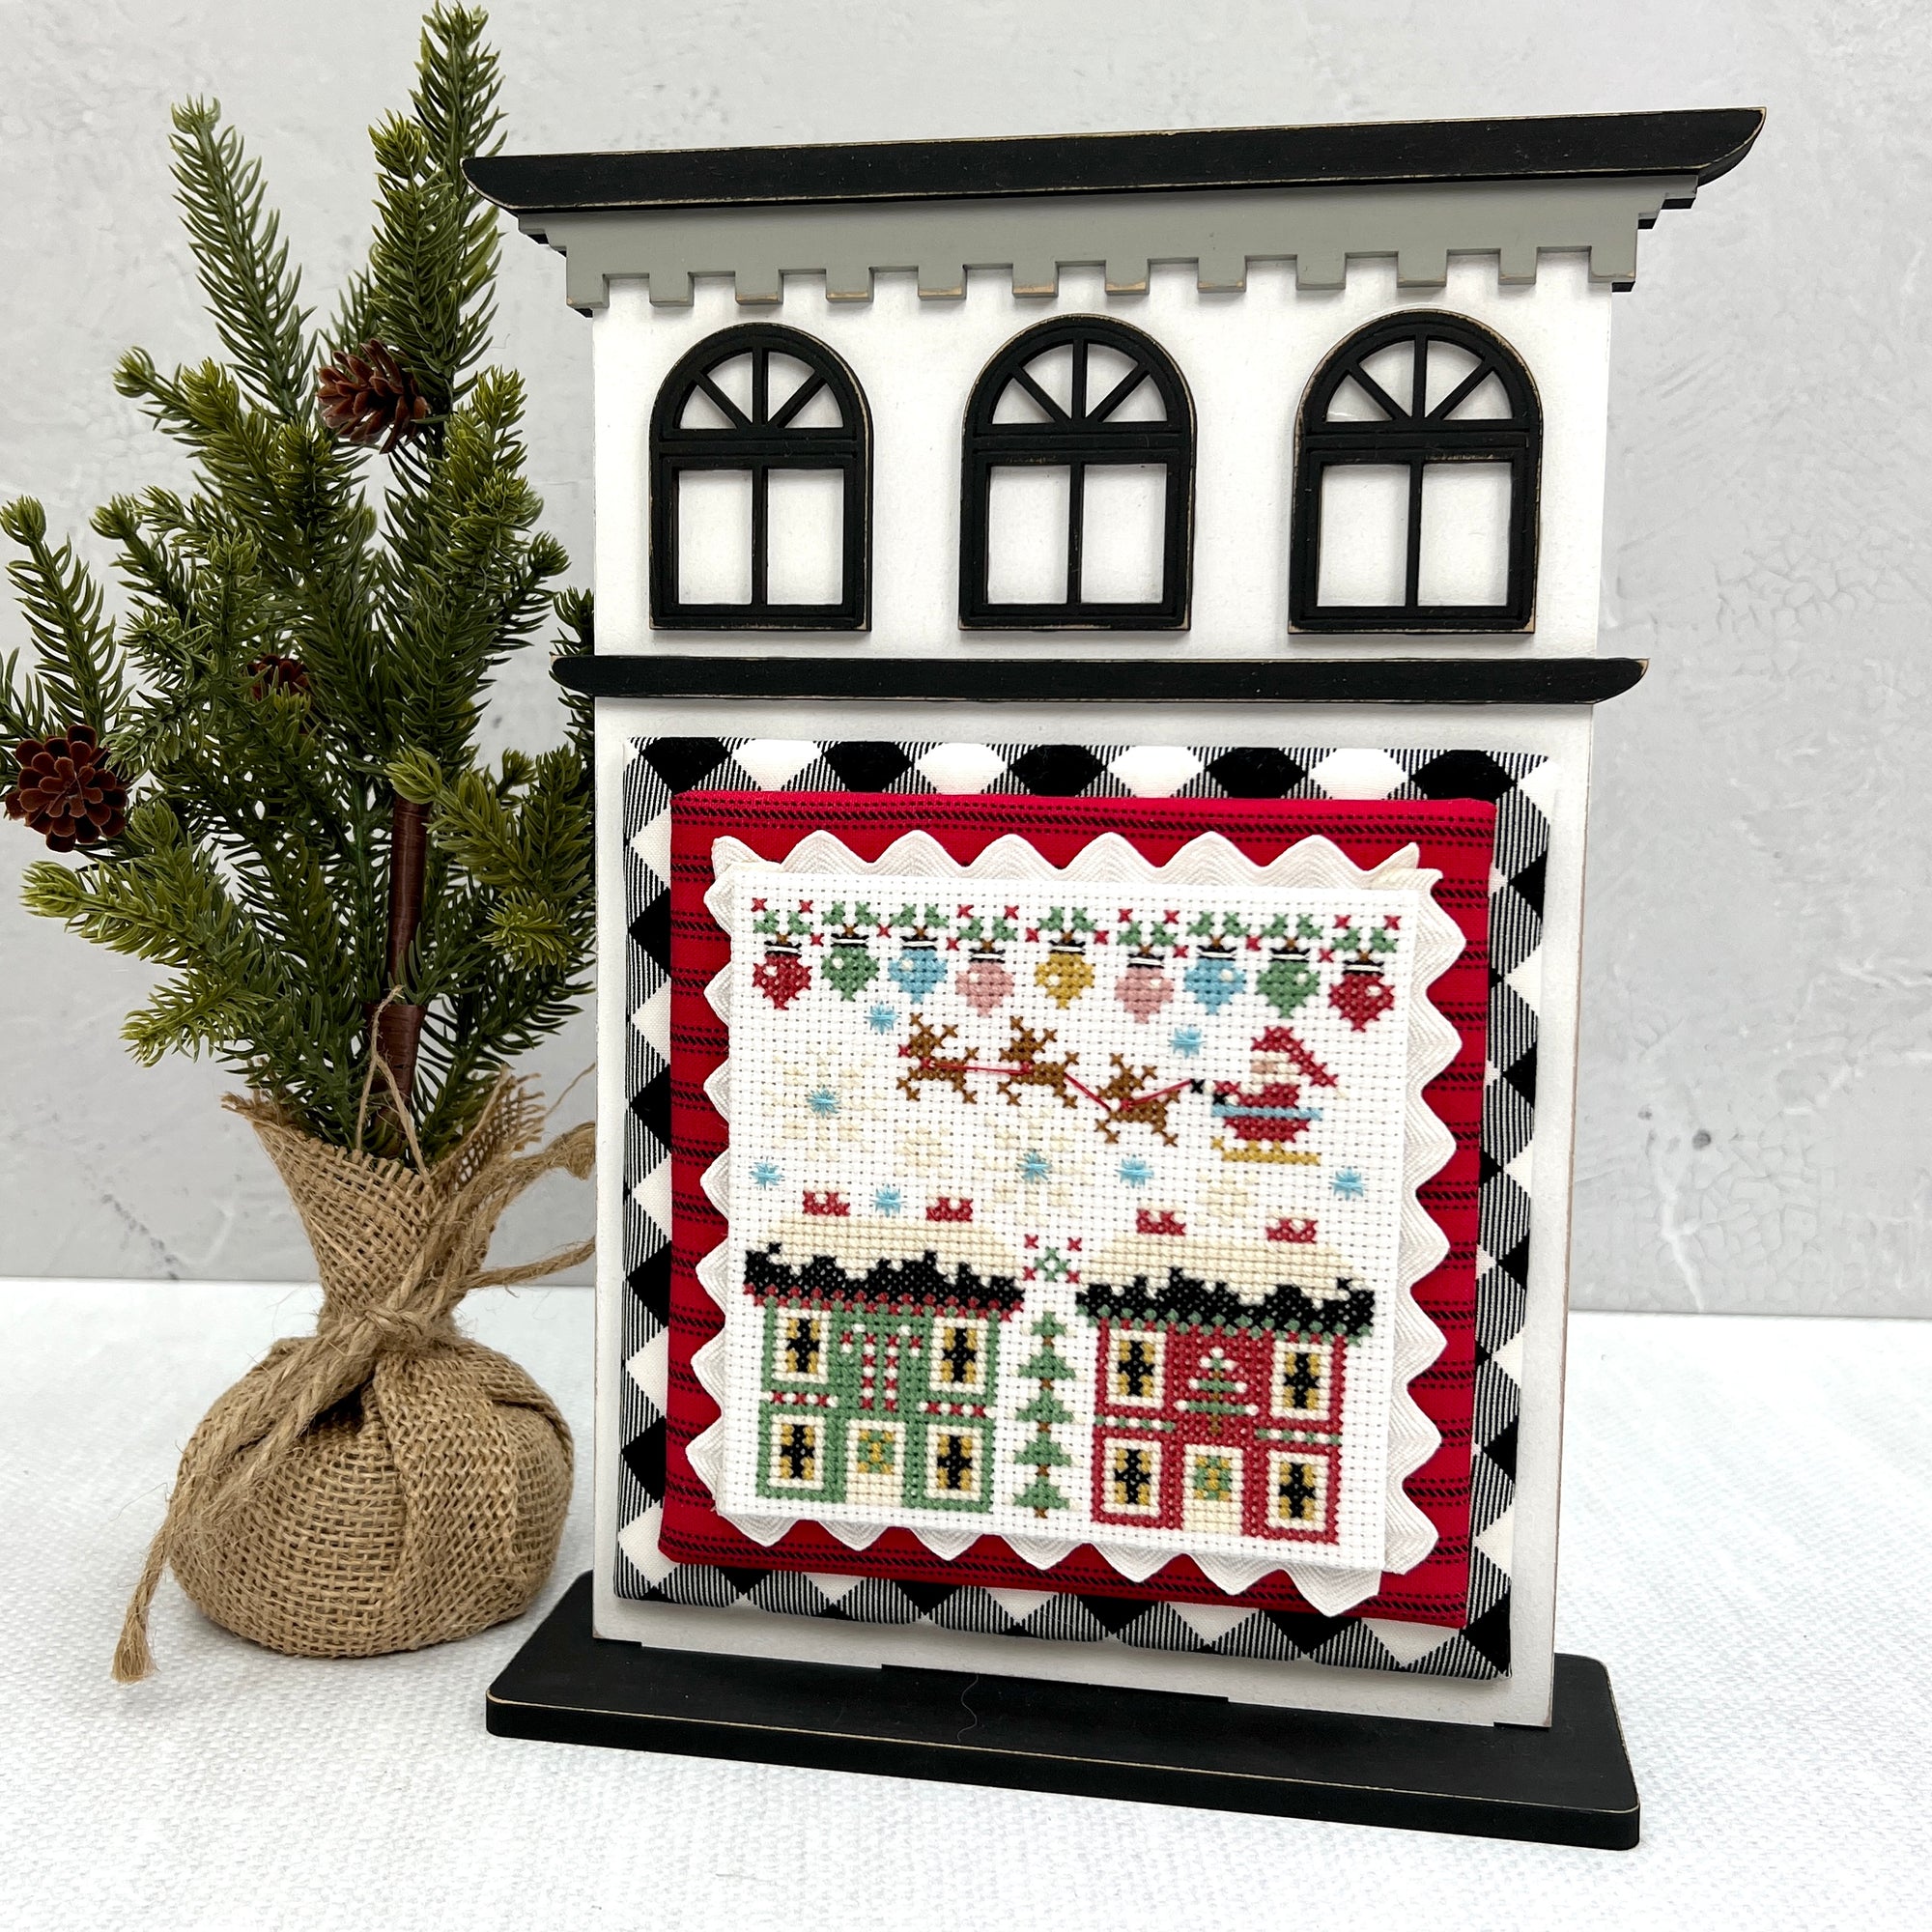 Wood city house for cross stitch display finishing. Stitching with the Housewives Christmas Dapper Dodads cross stitch.